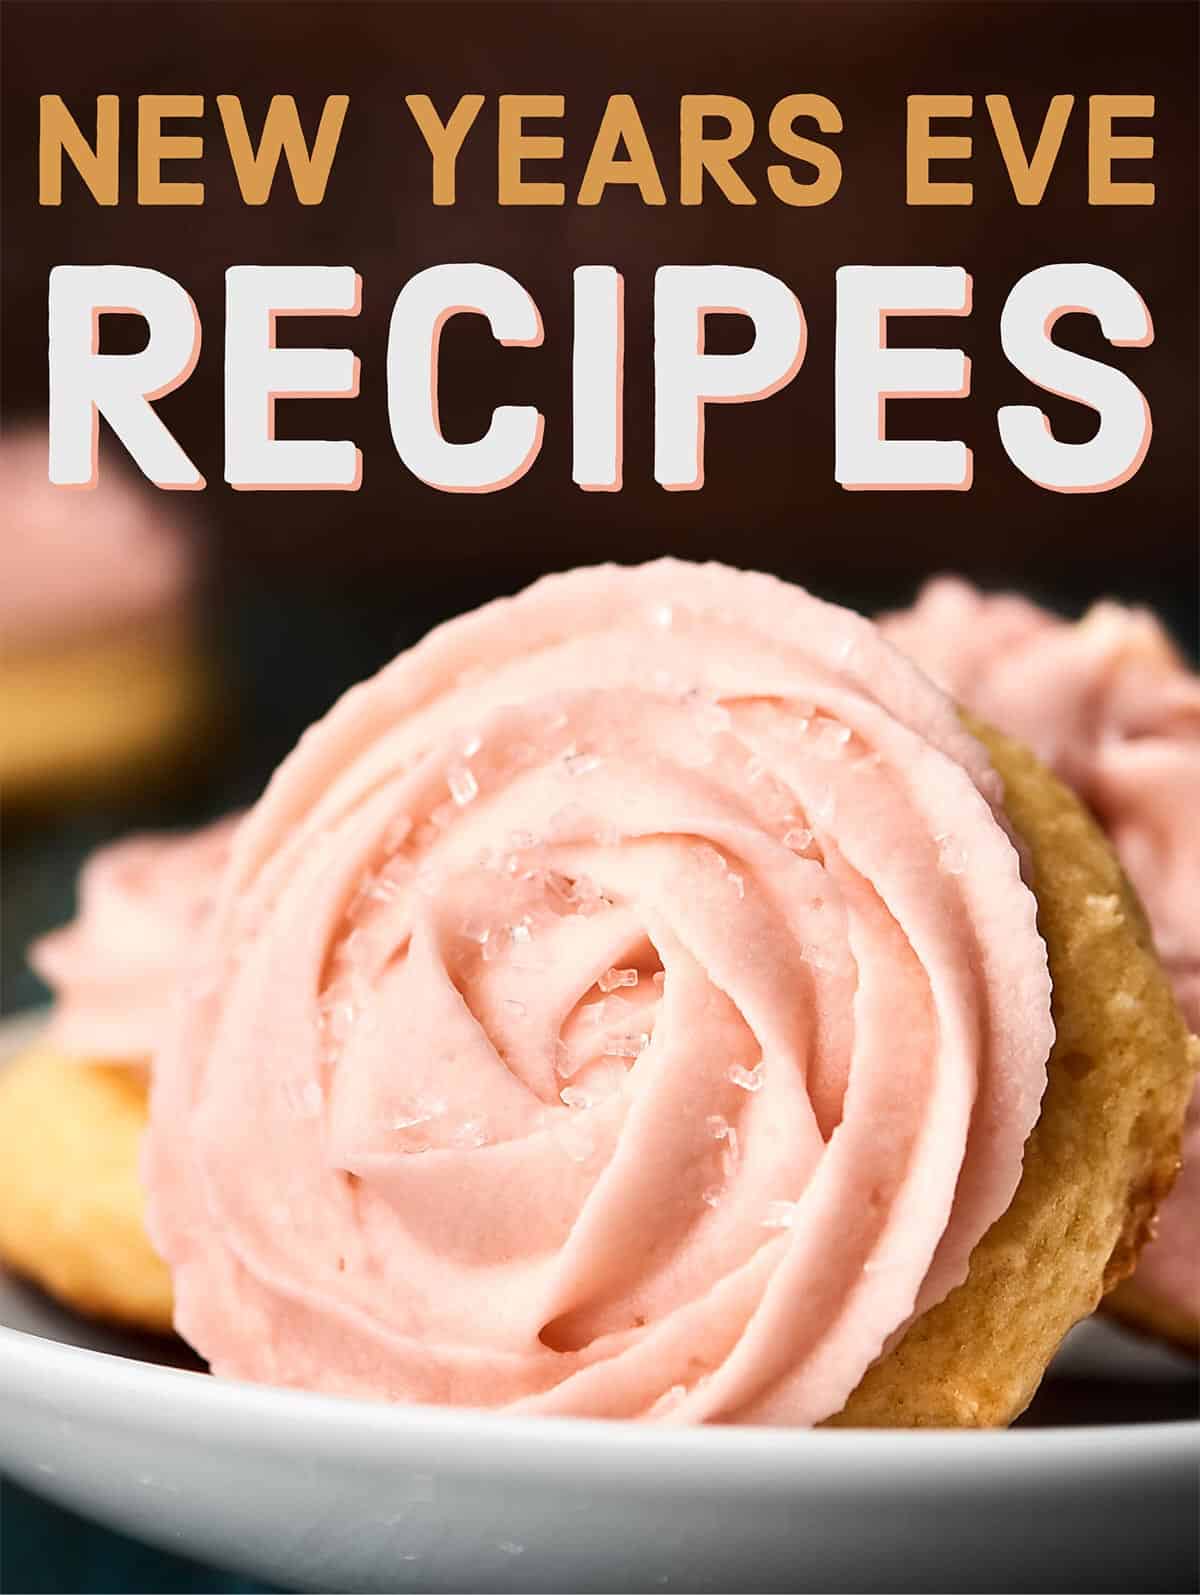 Easy New Years Eve Recipes 2017. Festive apps, easy dinners that can sit out for long periods of time, and delicious desserts! showmetheyummy.com